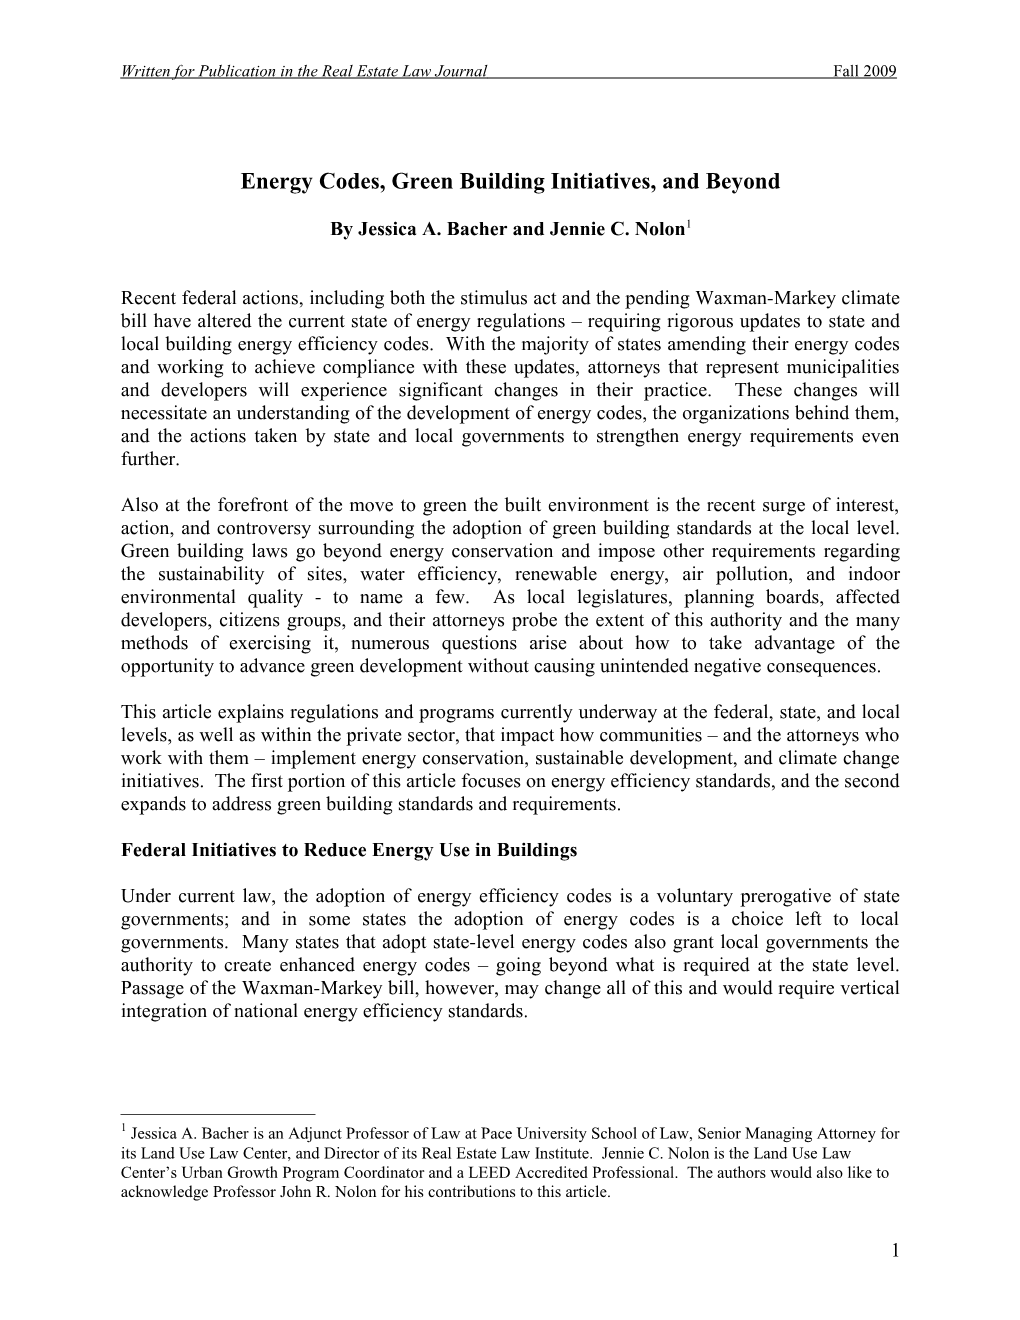 Energy Codes, Green Building Initiatives, and Beyond